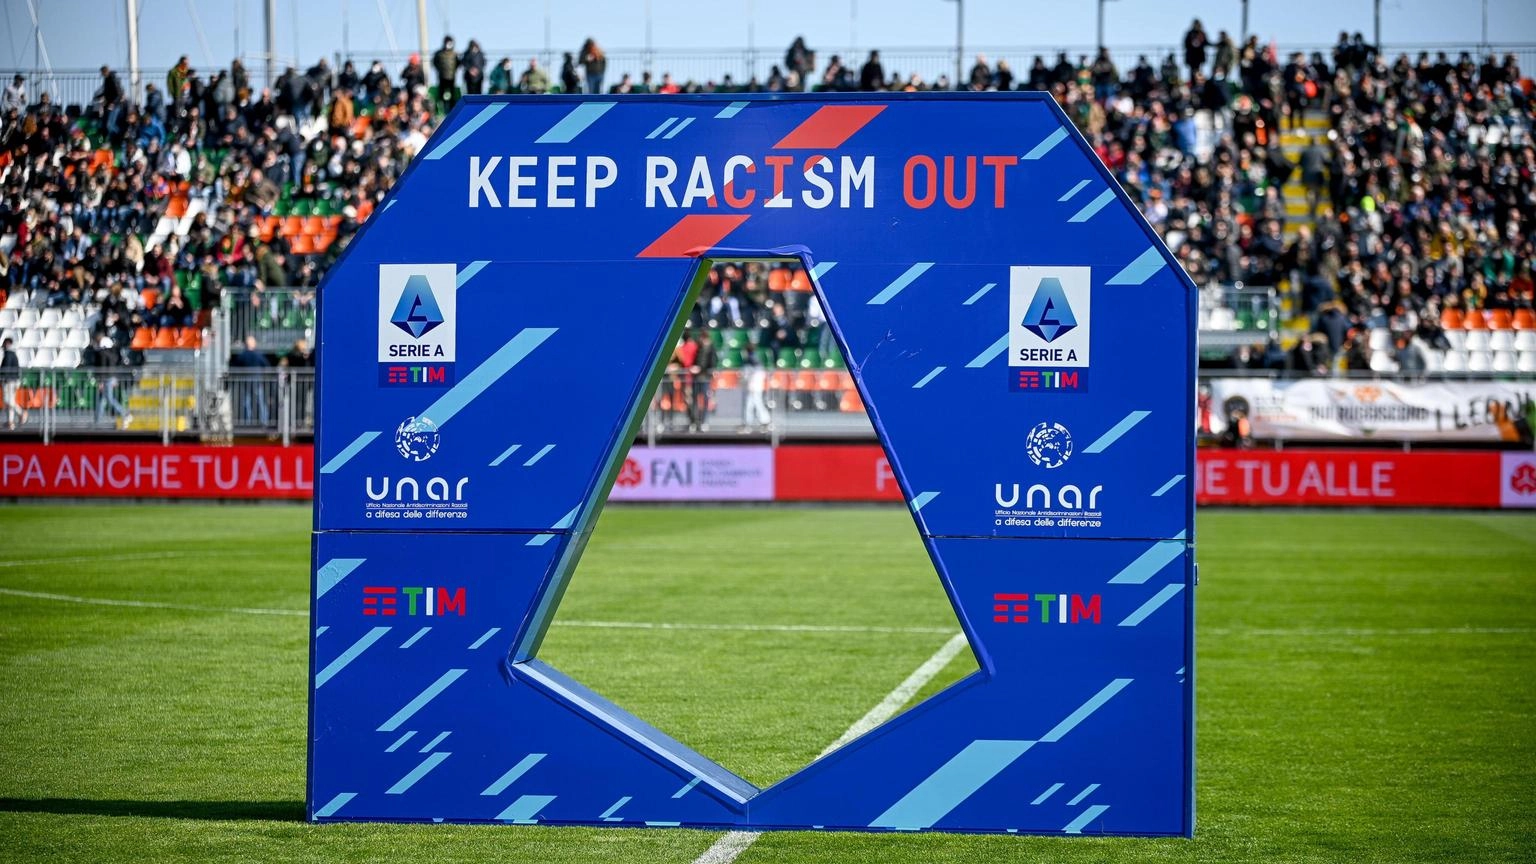 Razzismo: in Serie A torna la campagna 'Keep racism out'